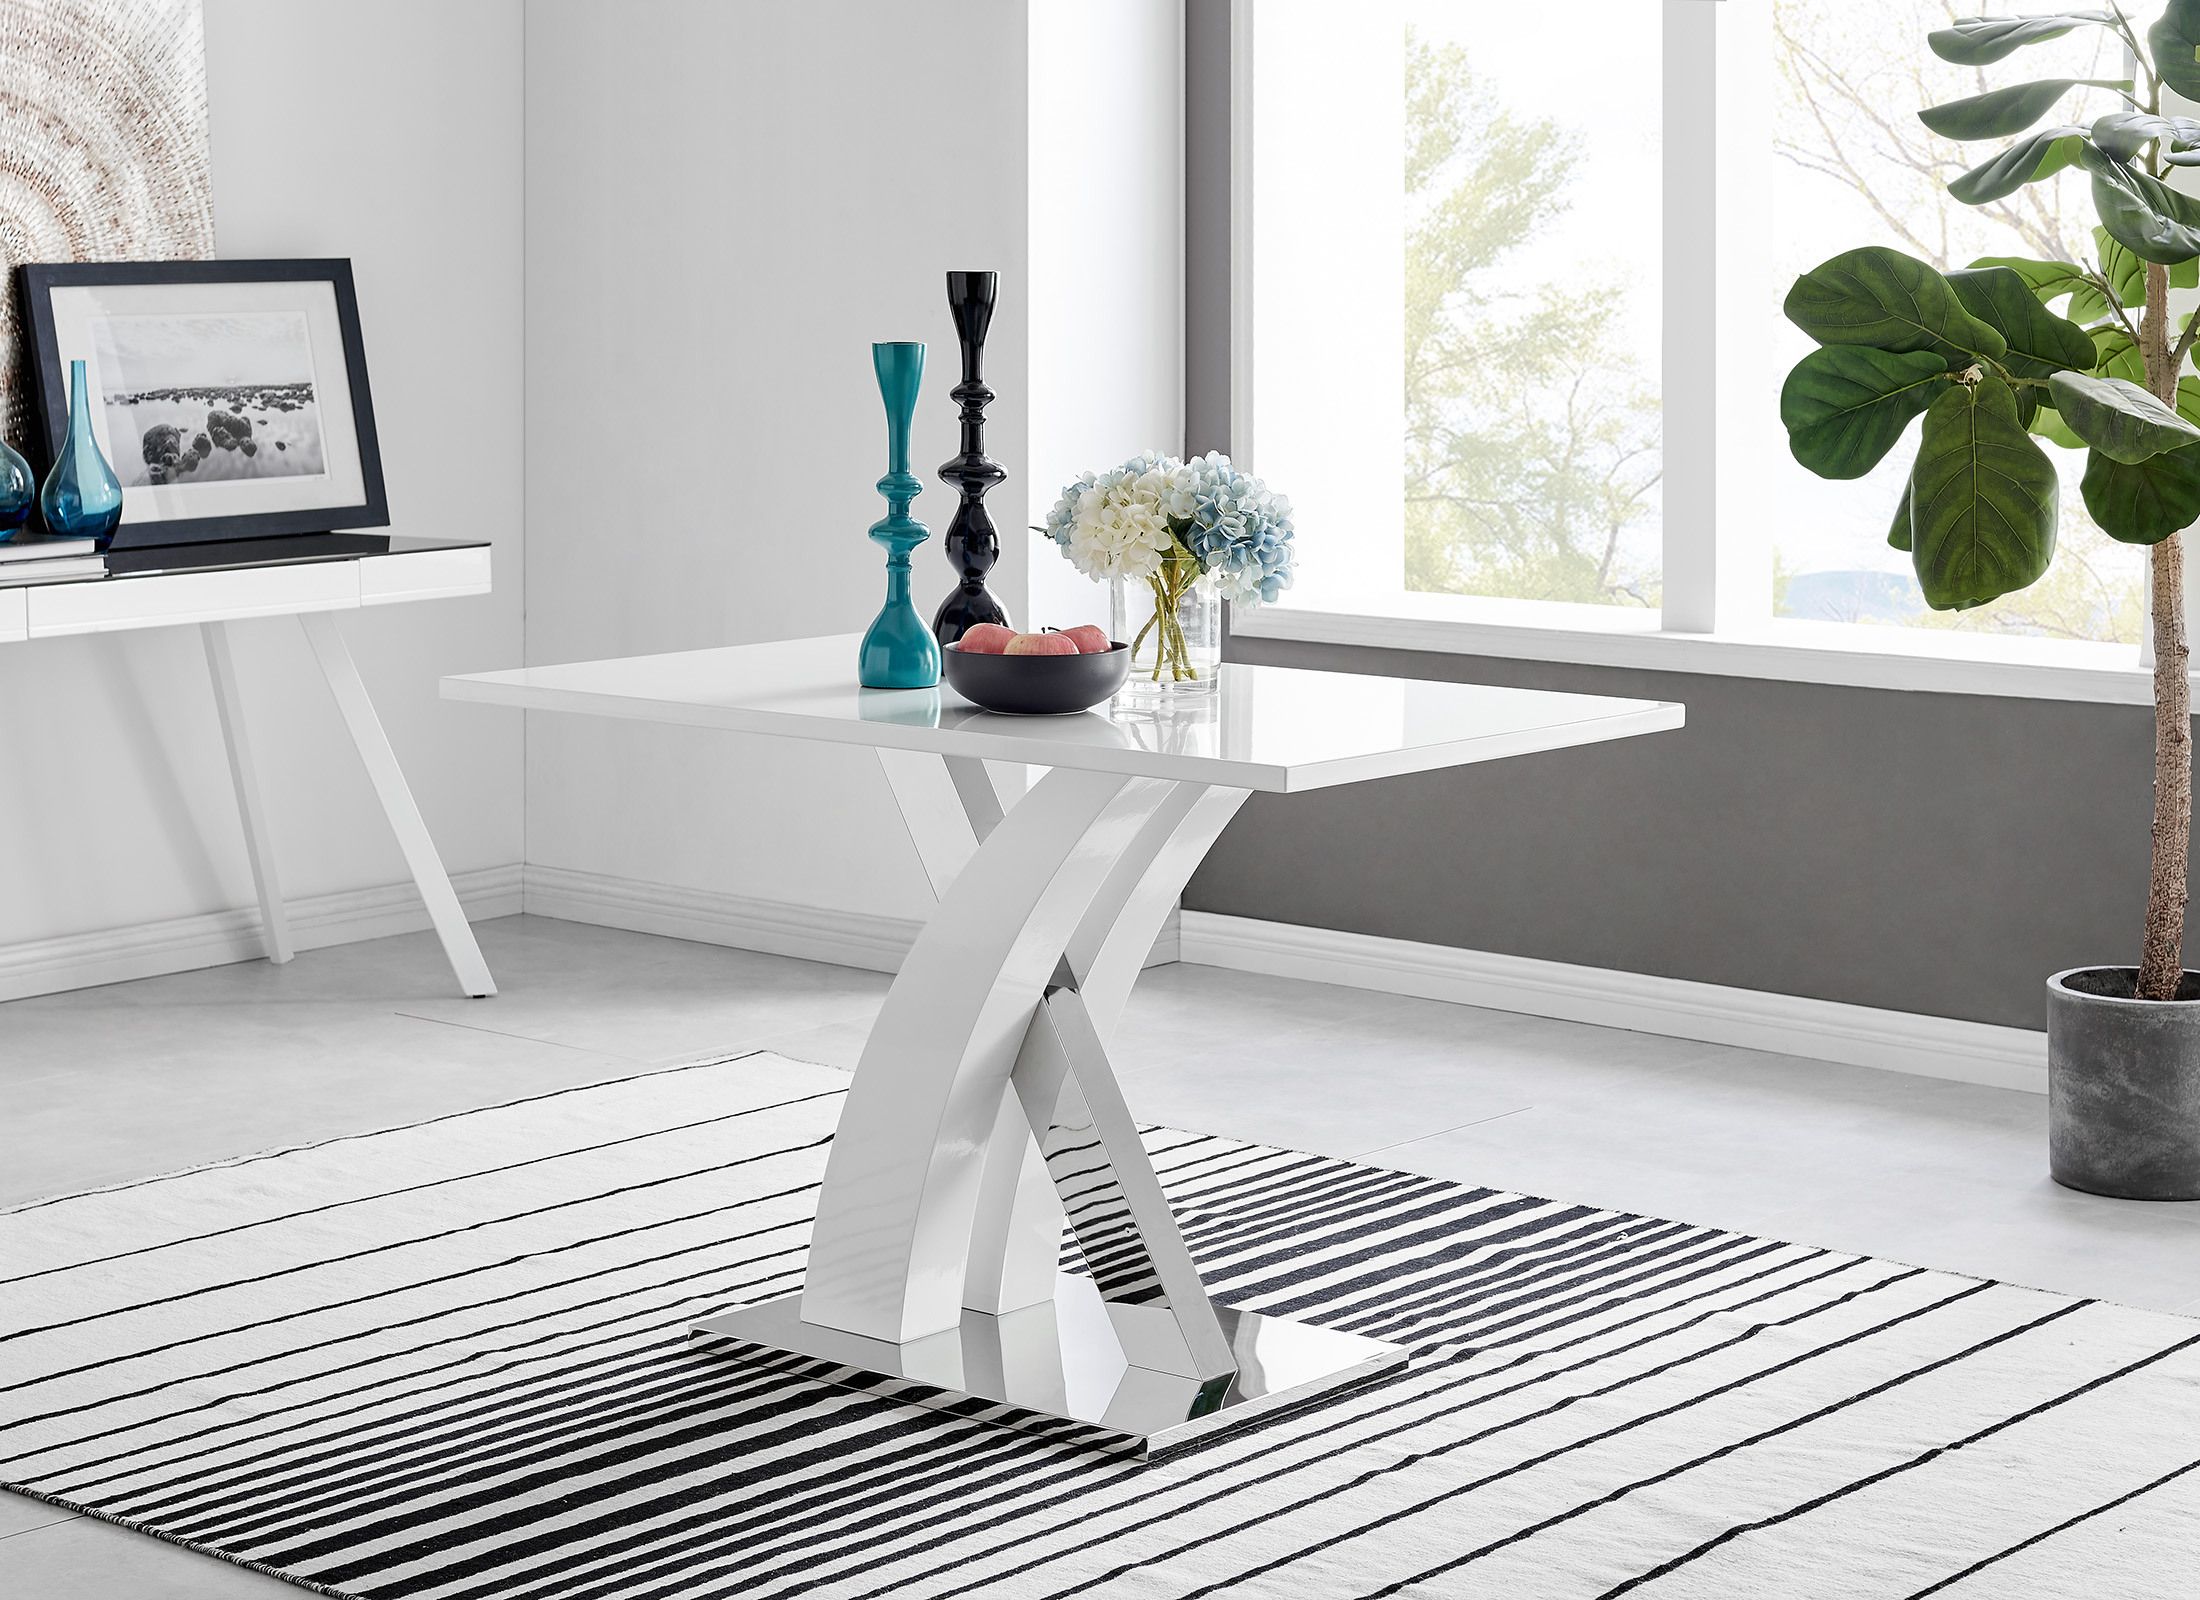 Atlanta White High Gloss & Chrome Dining Table | Furniturebox With Glossy White And Chrome Modern Desks (View 1 of 15)